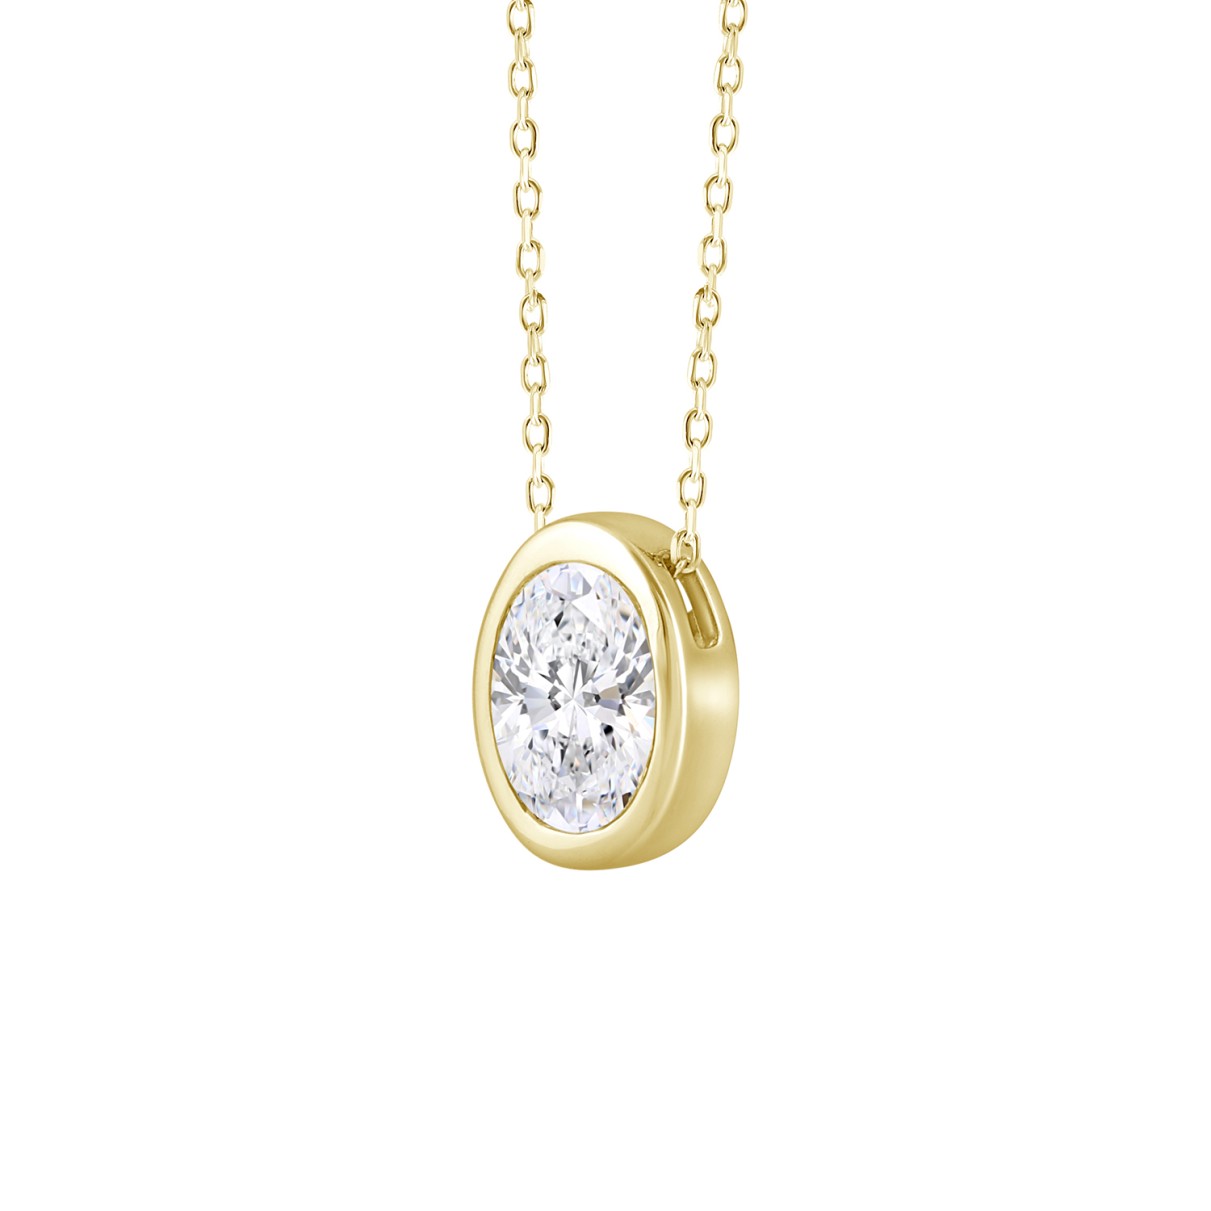 LADIES SOLITAIRE PENDANT 1CT OVAL DIAMOND 14K YELLOW GOLD WITH CHAIN